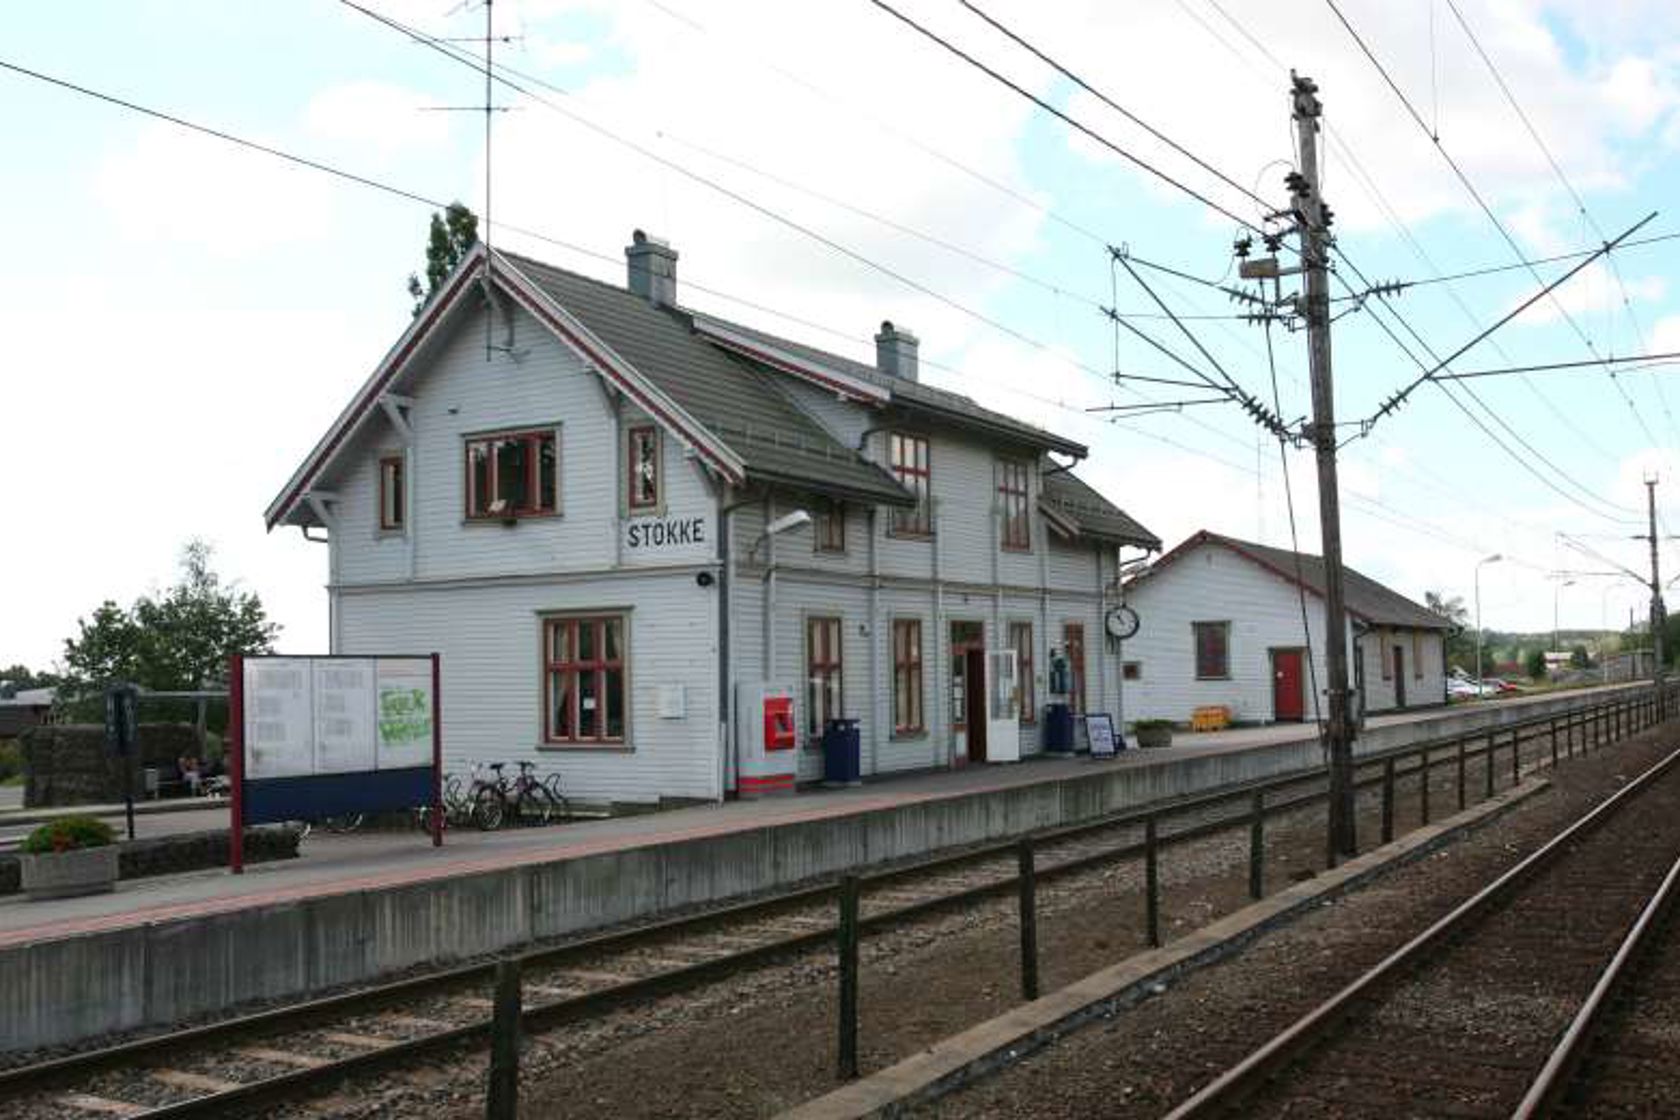 Exterior view of Stokke station